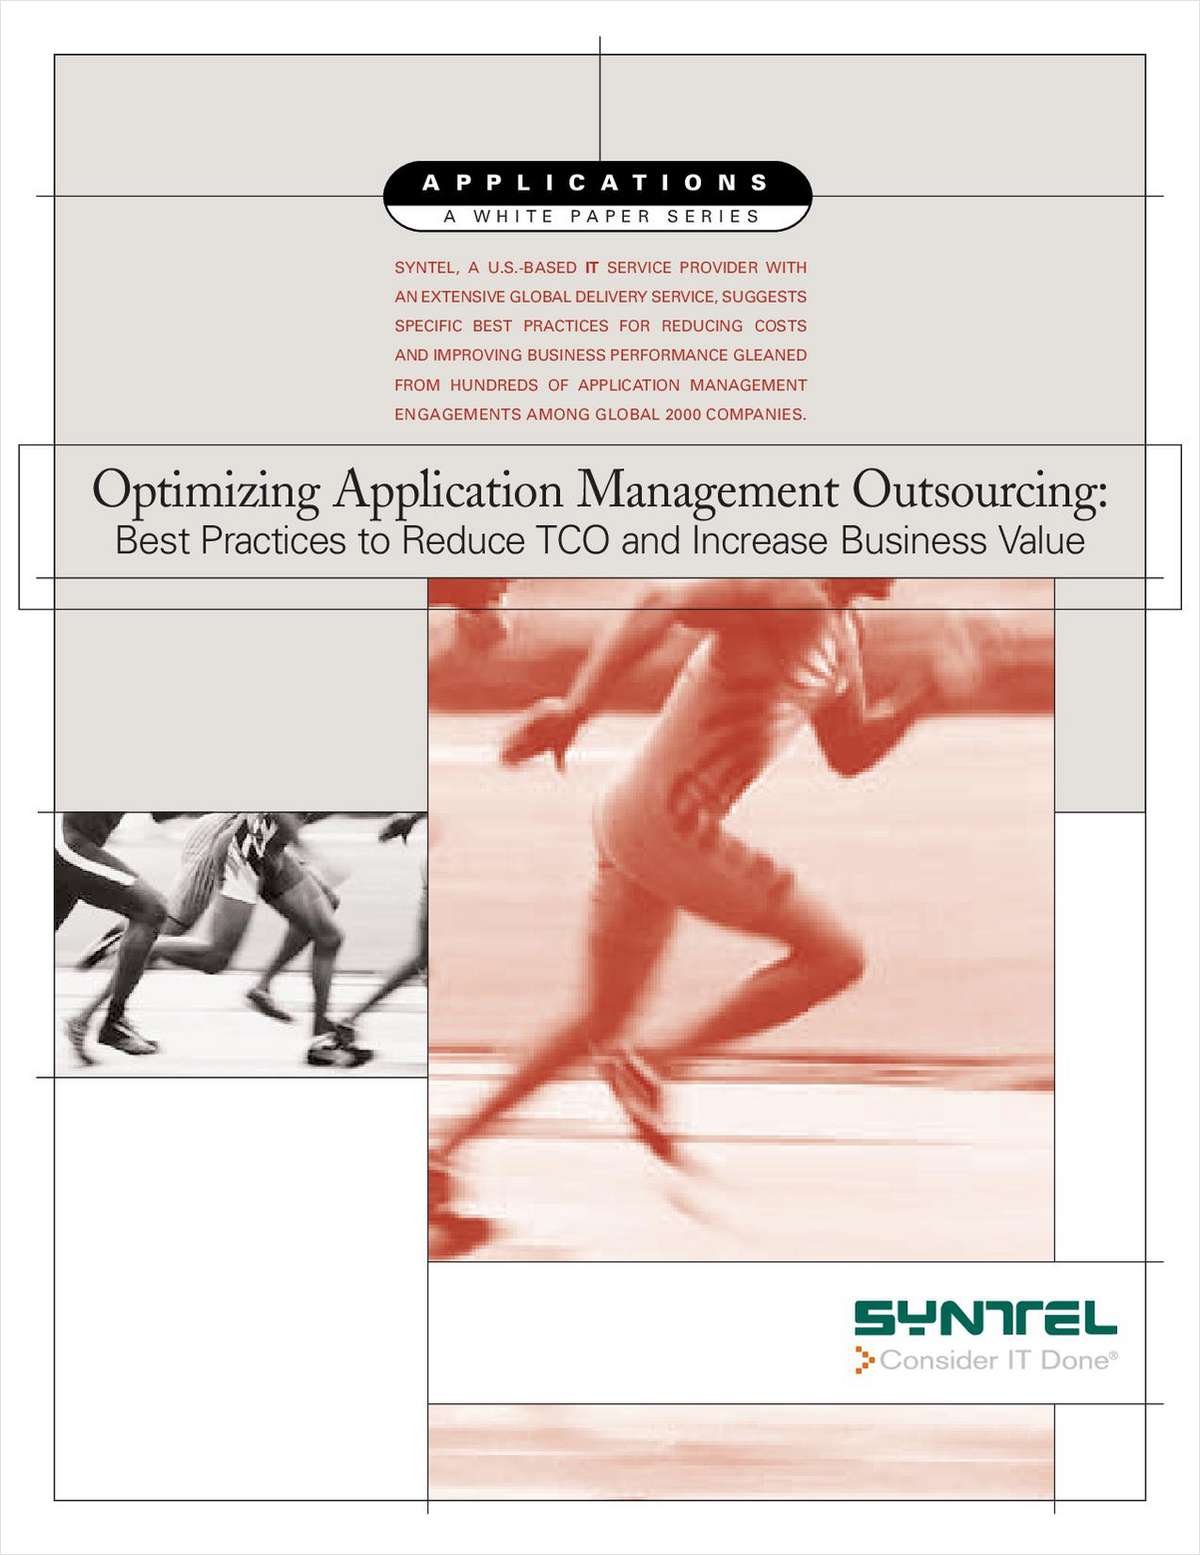 Optimizing Application Management Outsourcing: Best Practices to Reduce TCO and Increase Business Value